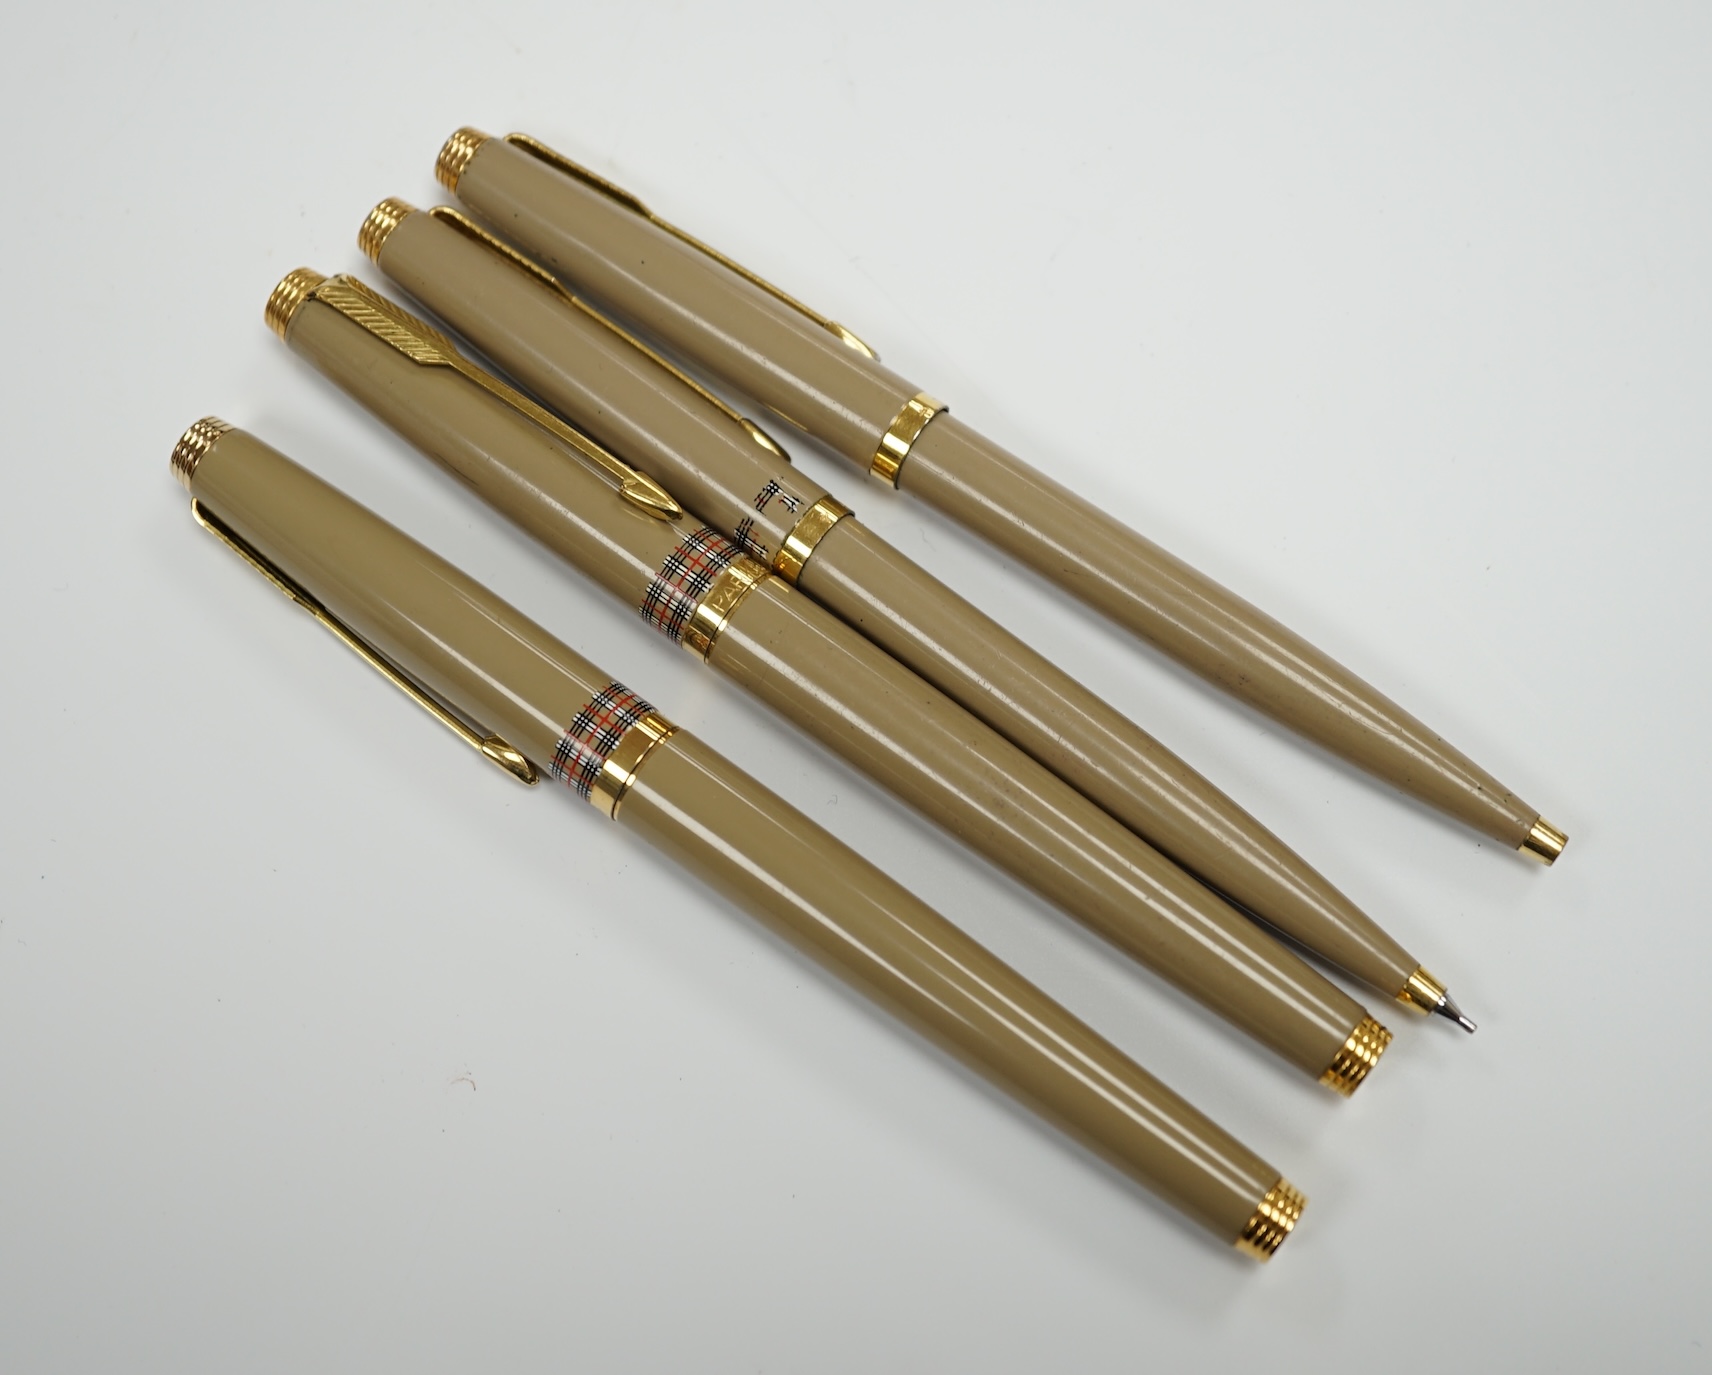 Parker for Burberry - a pair of fountain pens, a ballpoint pen and pencil in box, the vendor being